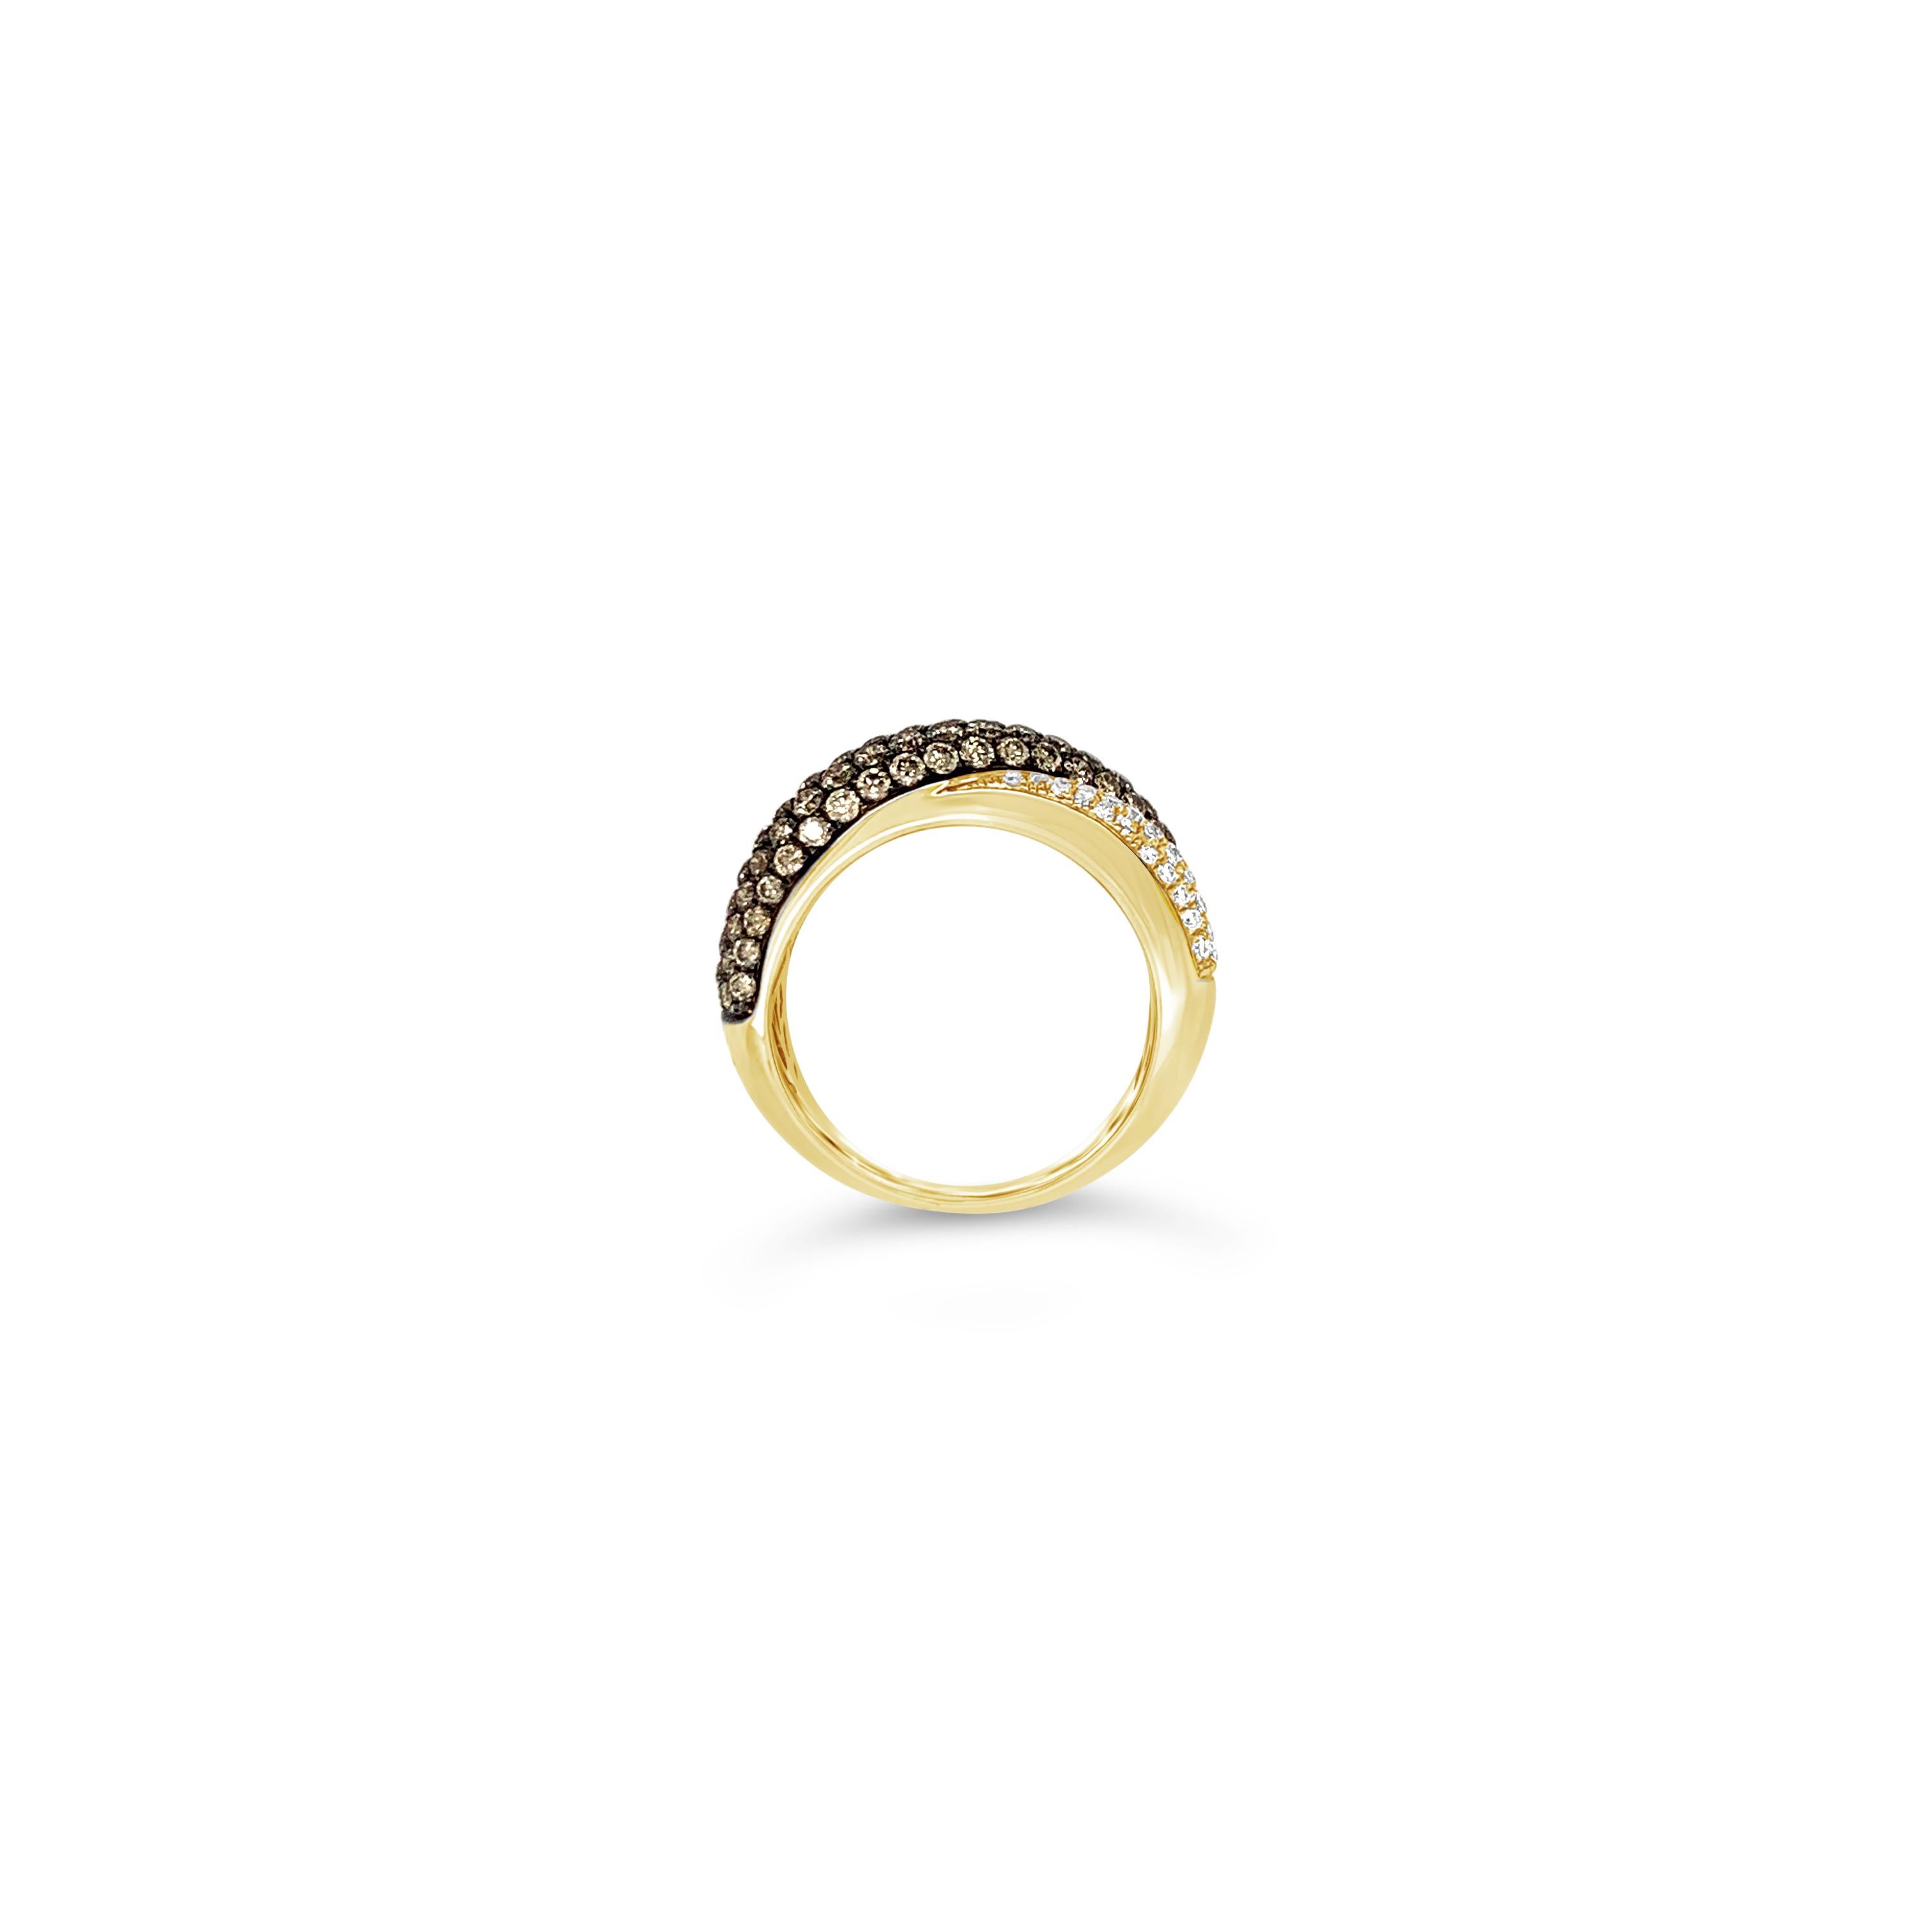 Le Vian® Ring featuring 1.26 cts. Chocolate Diamonds®, .39 cts. Vanilla Diamonds® set in 14K Honey Gold™

Diamonds Breakdown:
1.26 cts Brown Diamonds
.39 cts White Diamonds

Gems Breakdown:
None

Ring may or may not be sizable, please feel free to